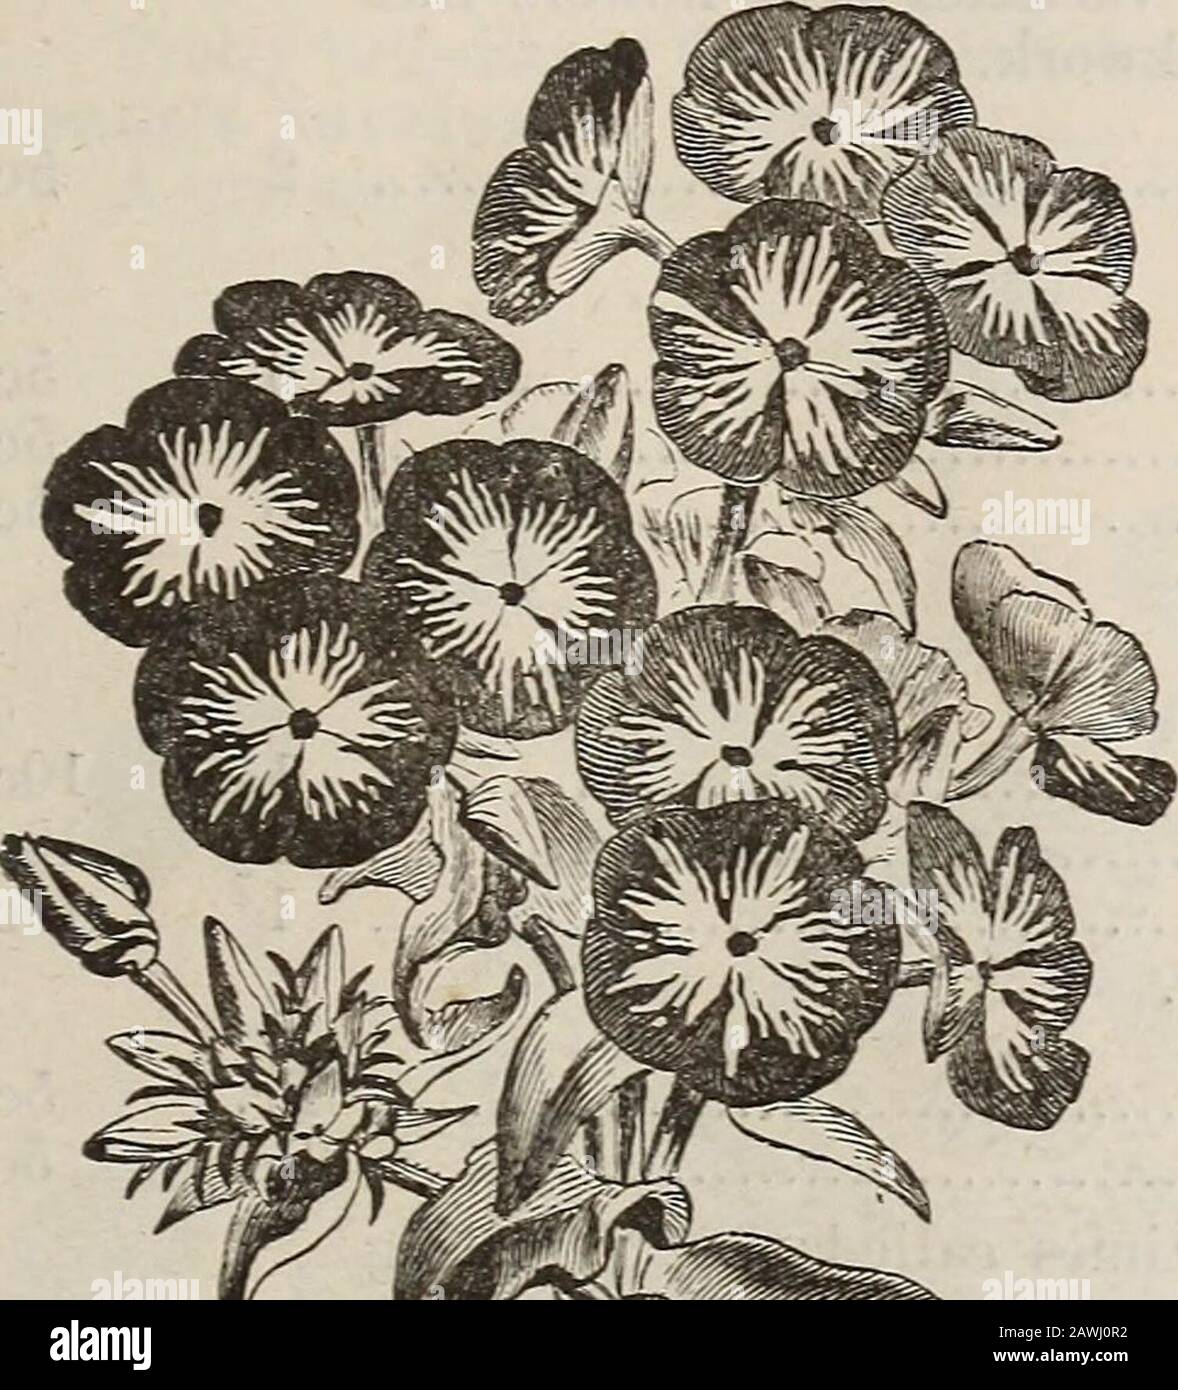 Catalogue of seeds, agricultural & horticultural supplies and guide for the garden, field & farm . Catalogue of Seeds. 61 Singular flowers, the upper petals being reflexed ANNUALS-Continued. Xicotiaua Affinis. Large, white and fragrant Macrophylla. Purple flowers, large leaTes Variegata. Variegated leaves Ornamental varieties of tobacco. Nigella Darnascena. Double, lavender blue Hispanica. Blue, curious flowers Alba. White Love in a Mist, or Devil in the Bushto resemble horns, b. Xolana, Fine mixed Tr. Trailing plants, resembling Dwarf Convolvulus. Colors blue and white ; good for rockworkand Stock Photo